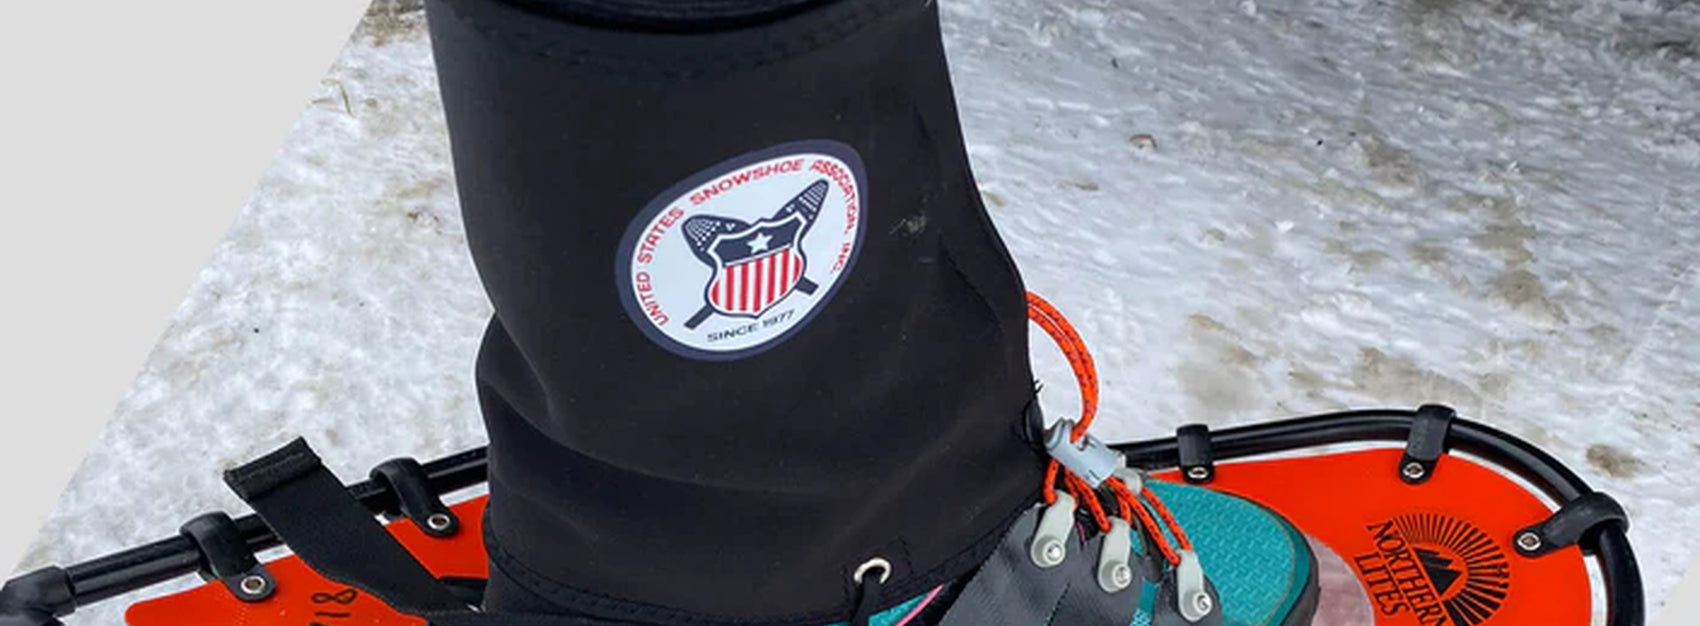 Snow Gaiters for Snowshoeing